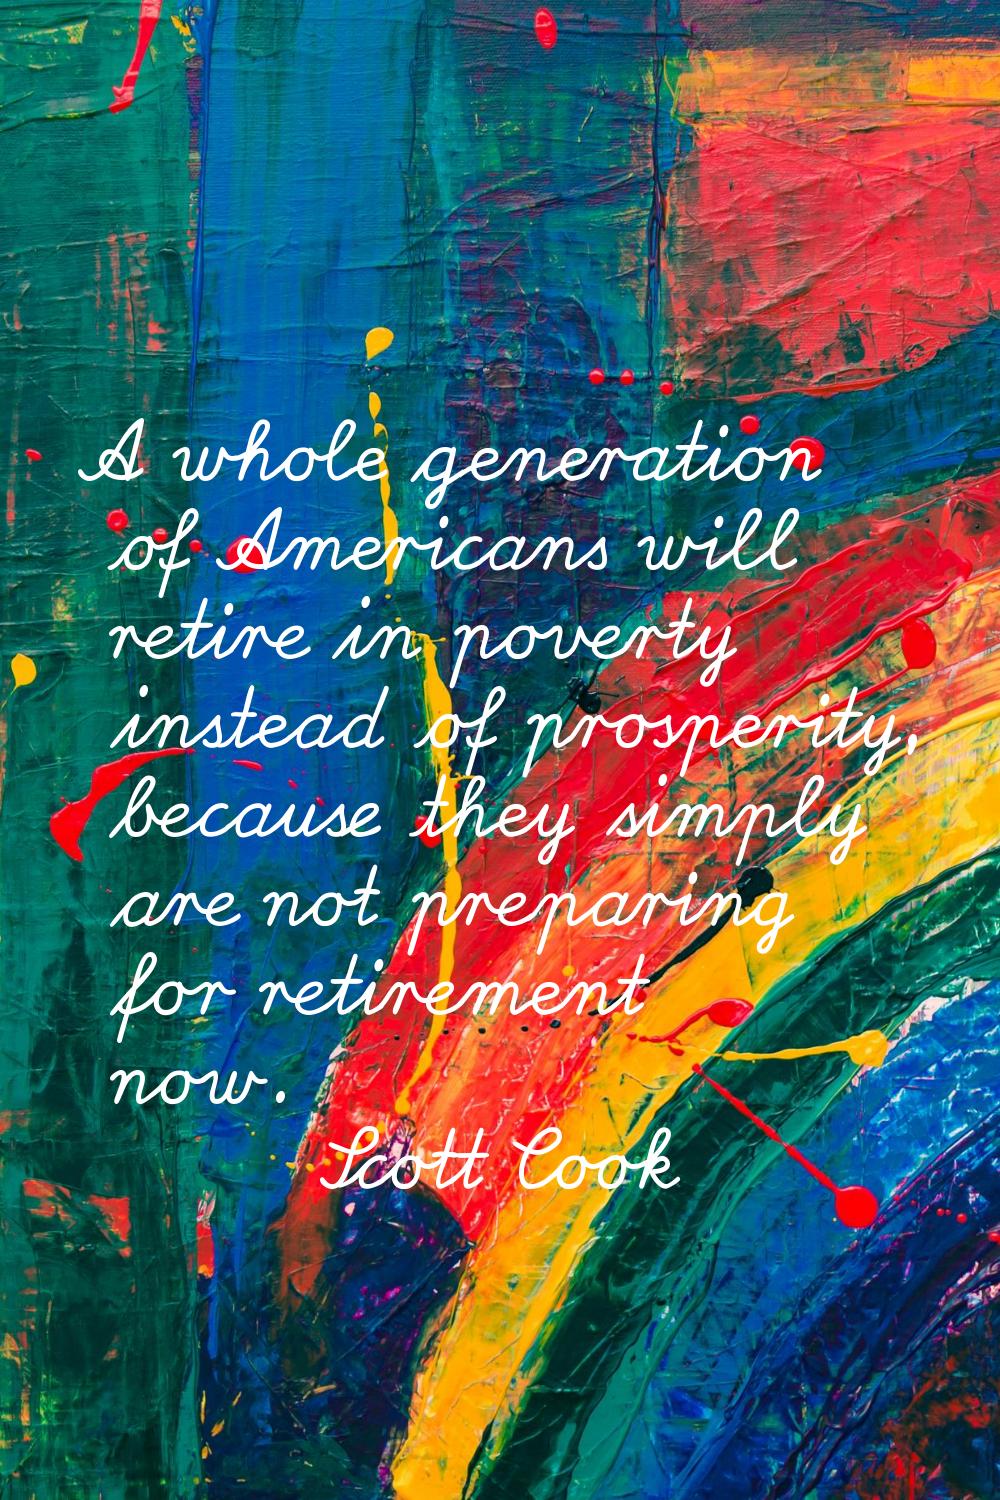 A whole generation of Americans will retire in poverty instead of prosperity, because they simply a